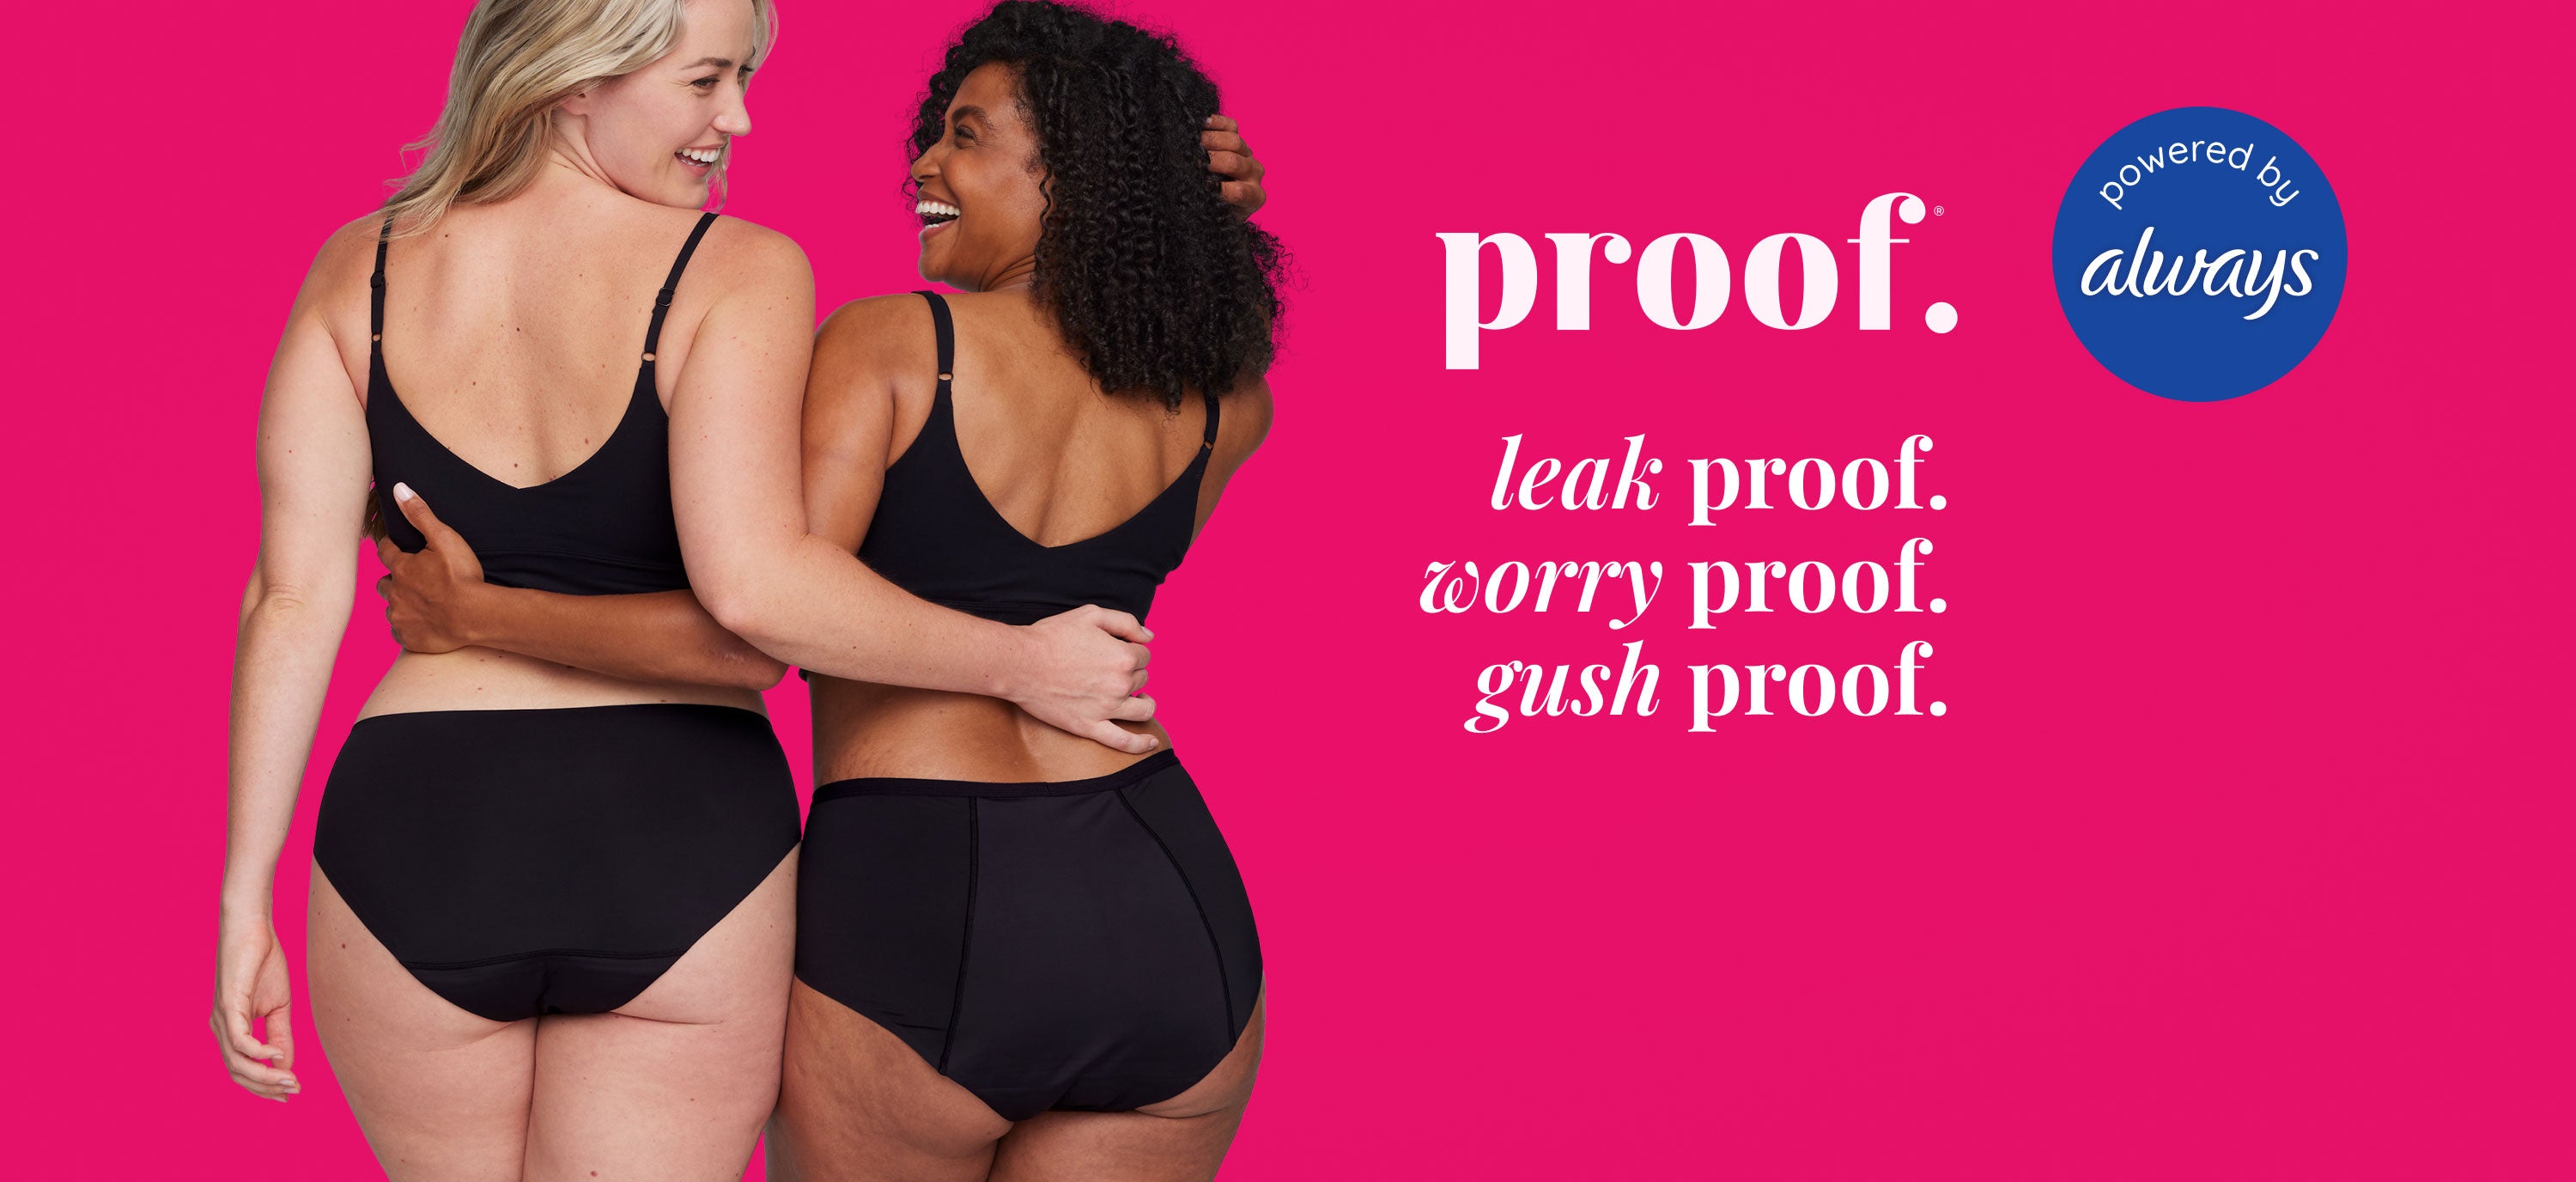 Seamless Period Underwear: Invisible Comfort & Freedom! – Oduho